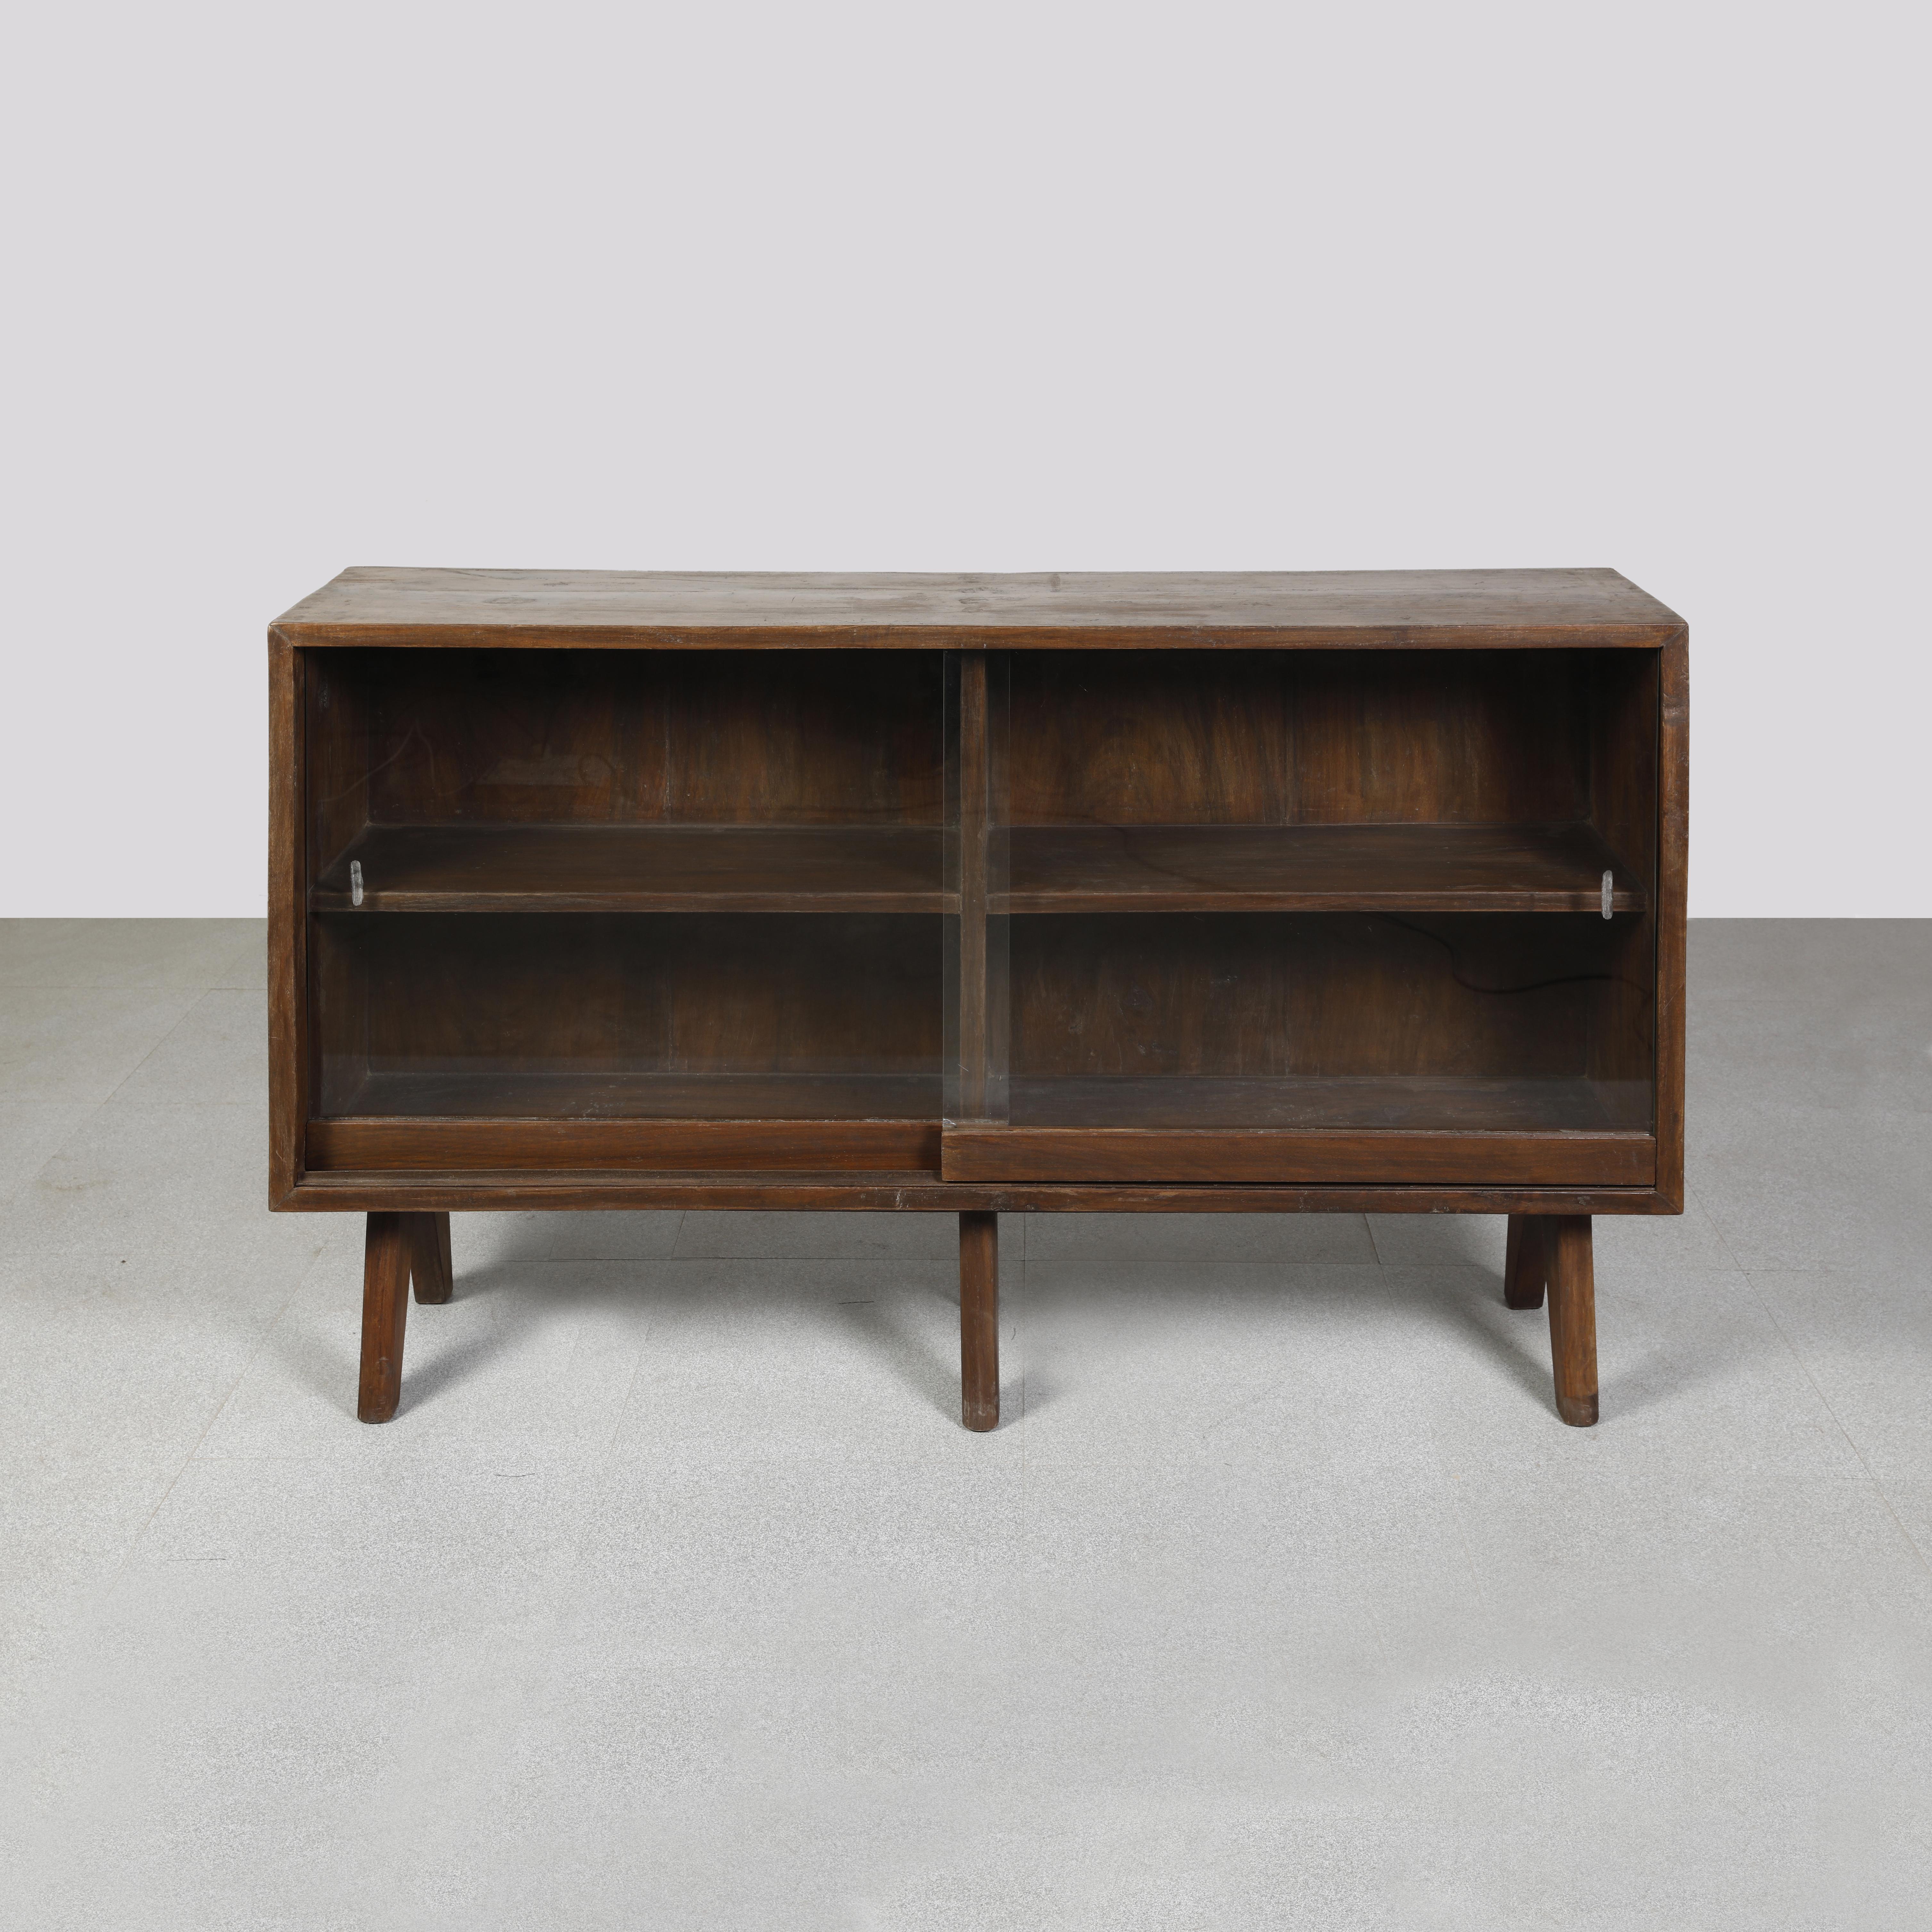 Mid-20th Century Pierre Jeanneret PJ-R-13-A Glass-Fronted Bookcase / Authentic Mid-Century Modern For Sale